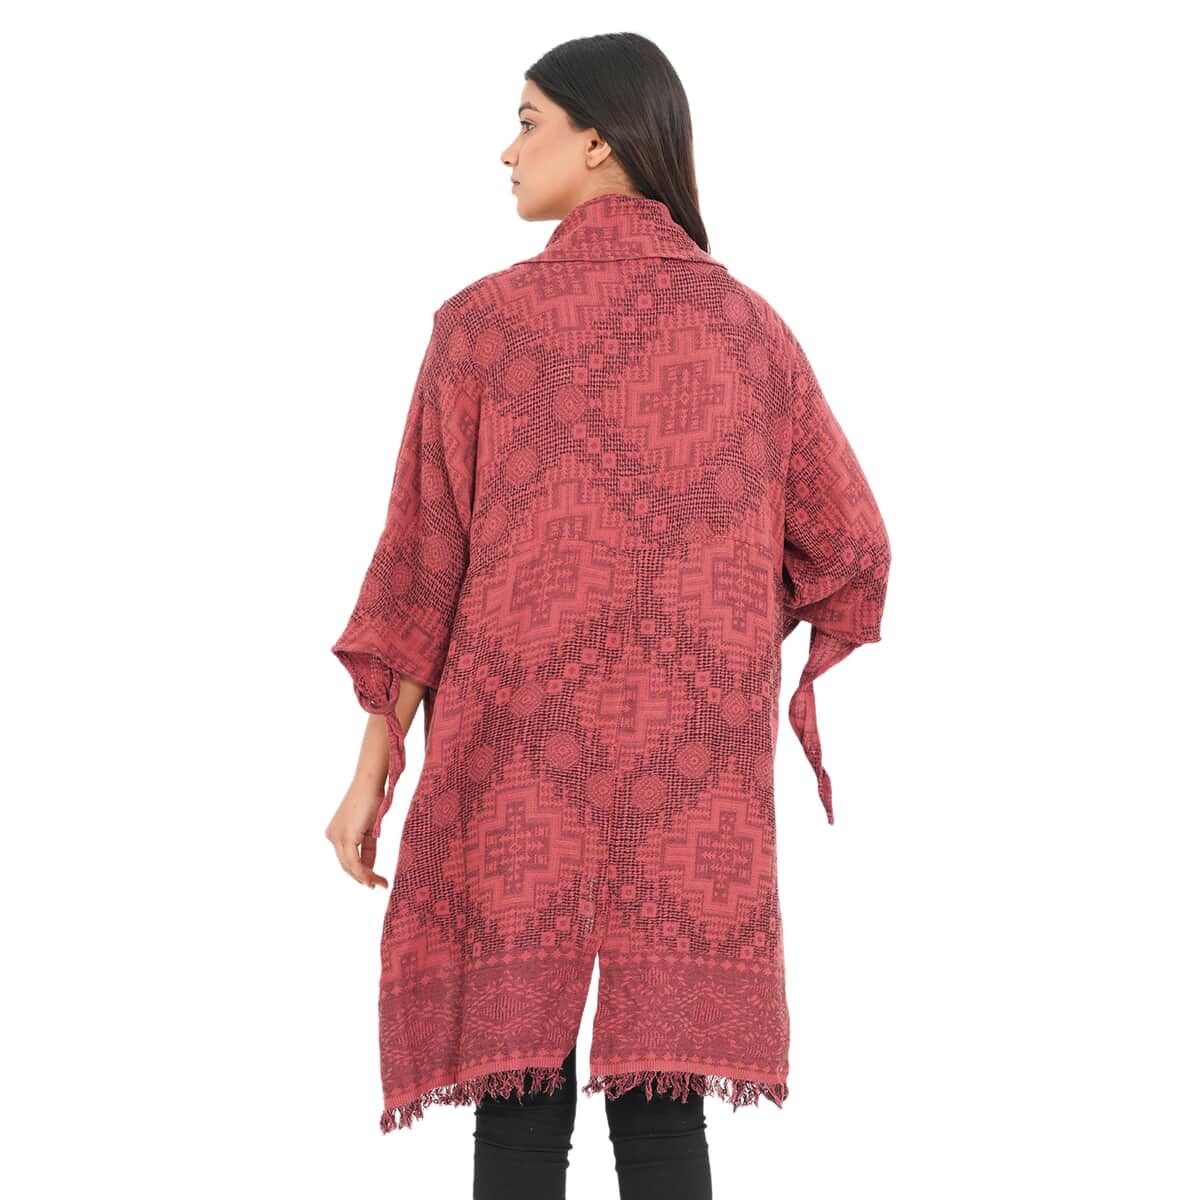 Tamsy Burgundy 100% Cotton Double Layer Jacquard Waterfall Front Cardigan - One Size Missy image number 1